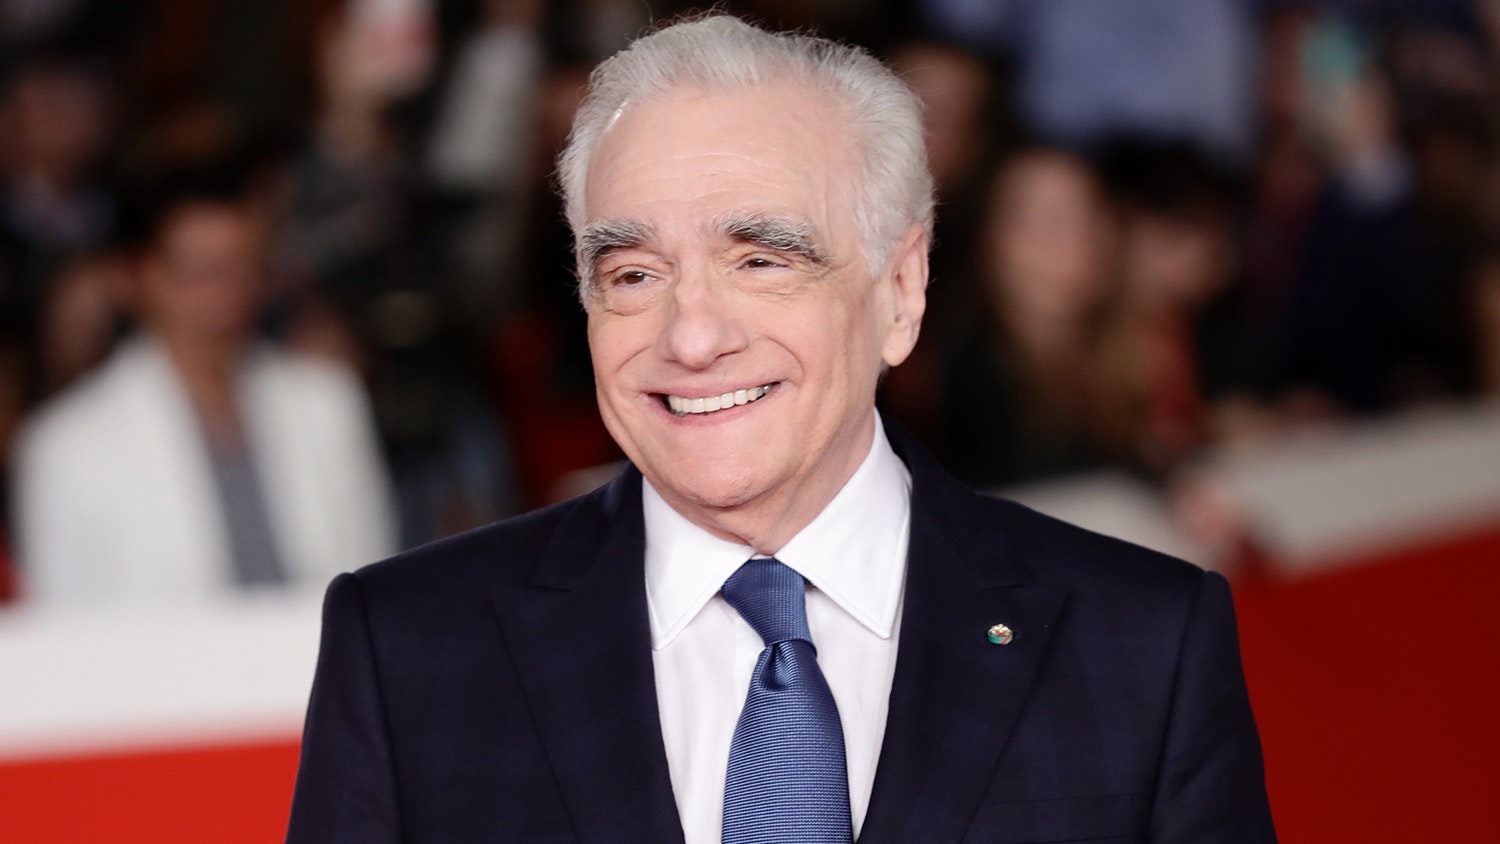 13 Facts About Martin Scorsese's The King of Comedy